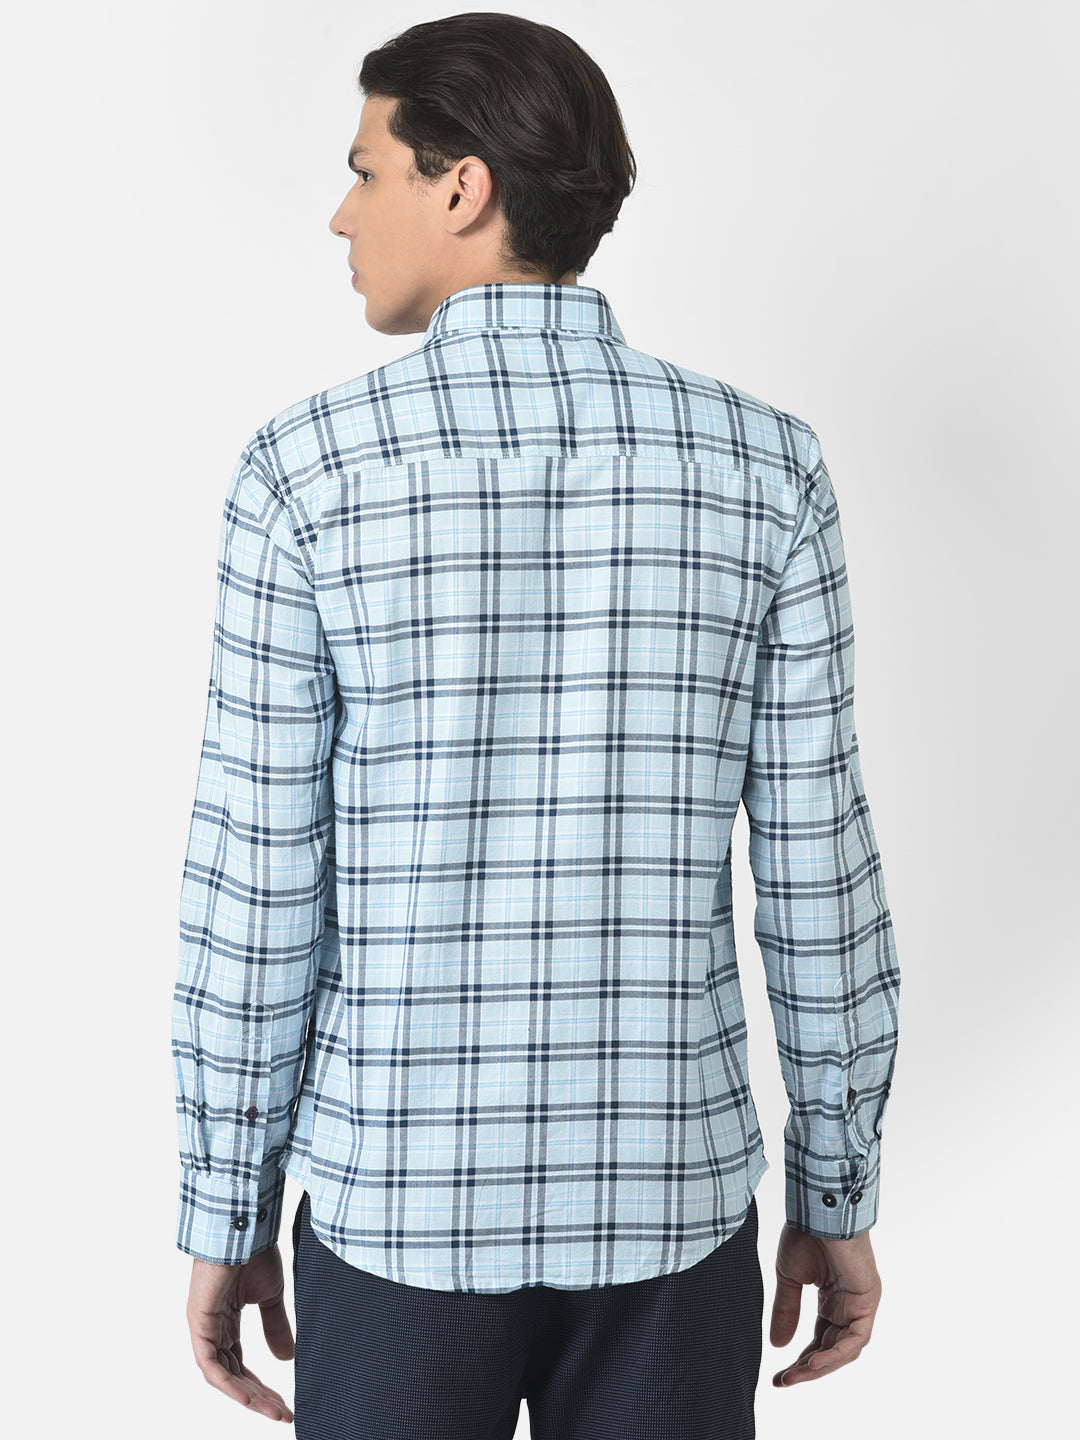 Blue Checked Shirt in Cotton